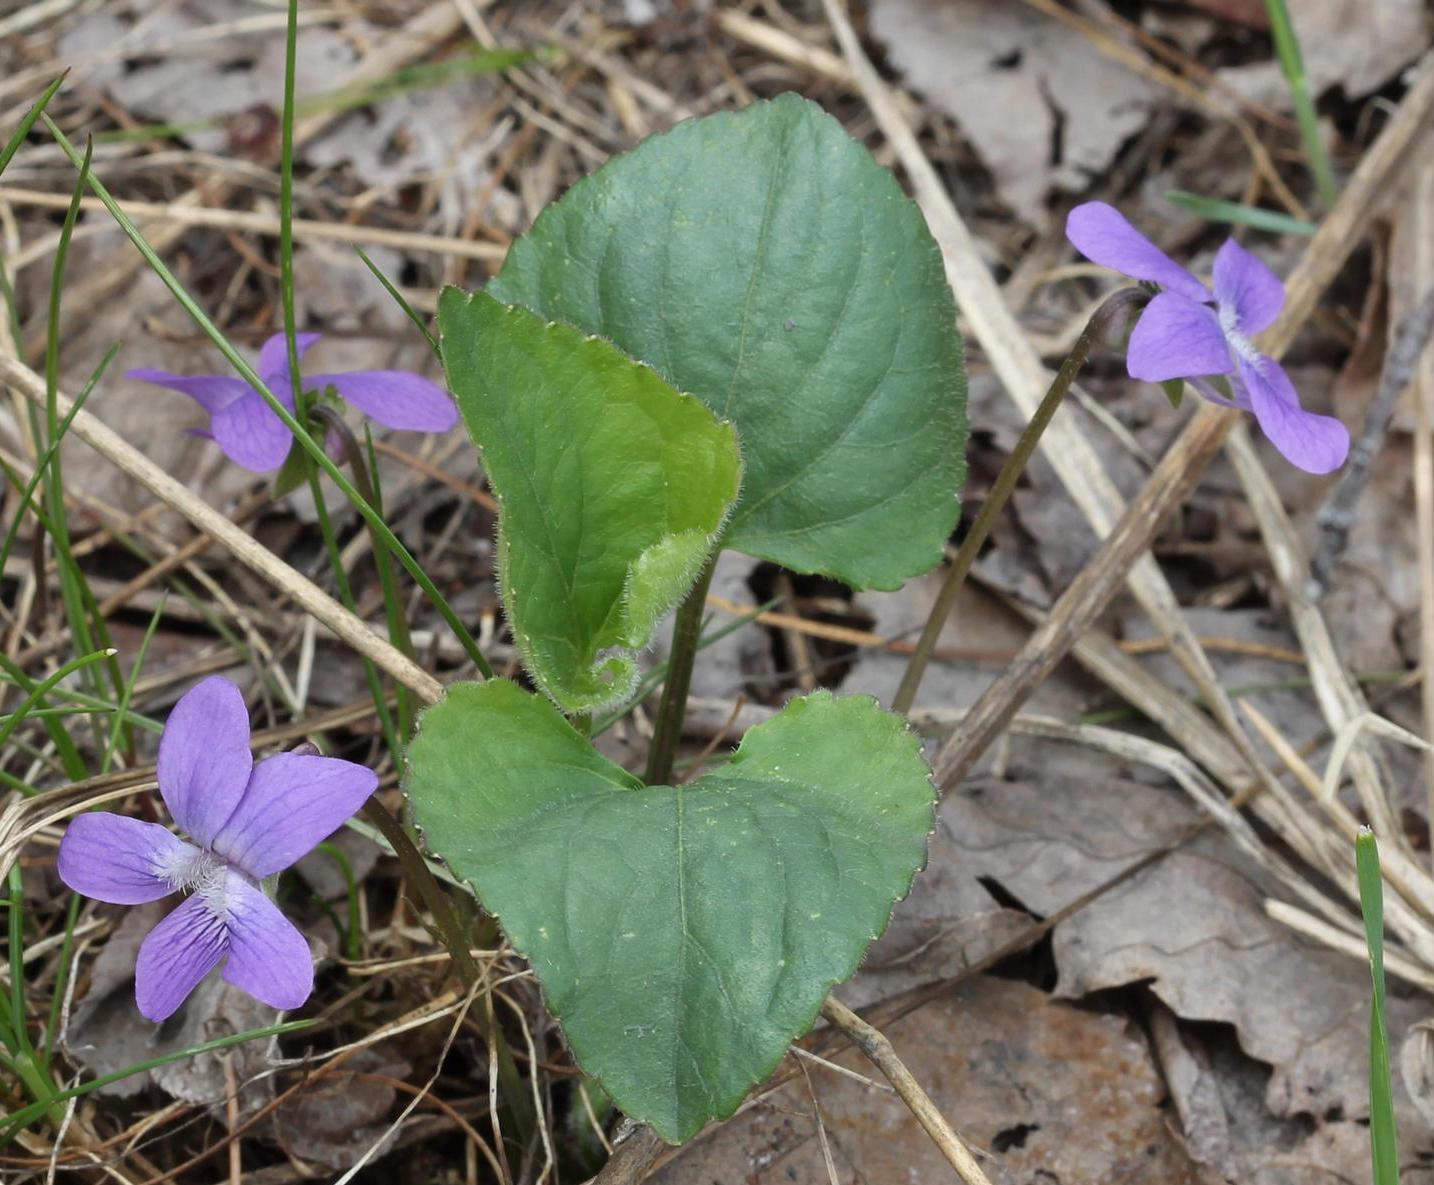 Common blue violet in bloom (Routledge, Sault College, Bugwood.org)